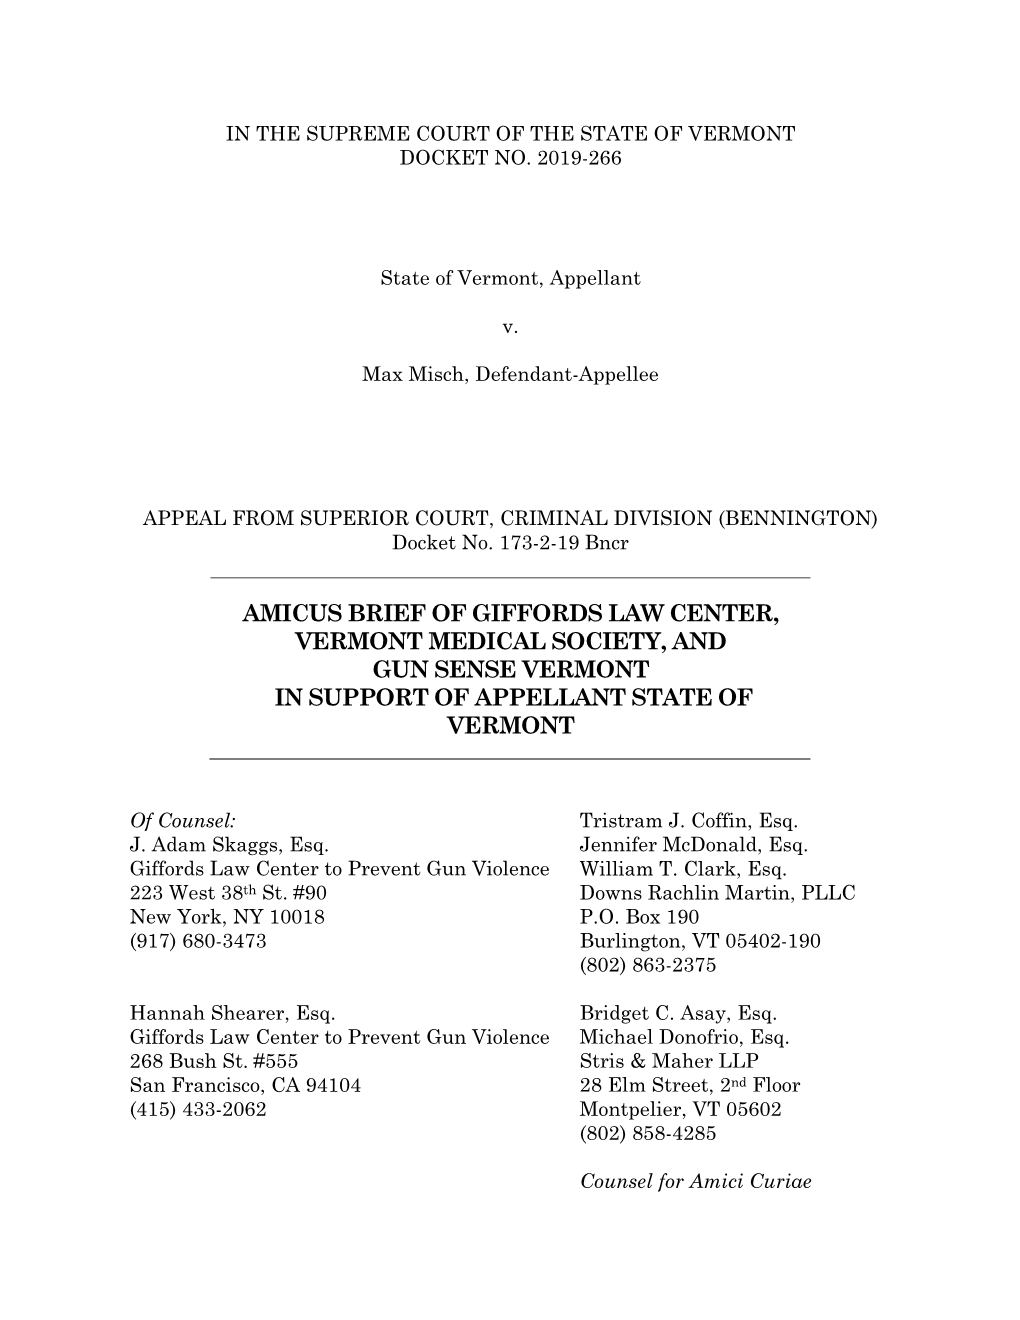 Amicus Brief of Giffords Law Center, Vermont Medical Society, and Gun Sense Vermont in Support of Appellant State of Vermont